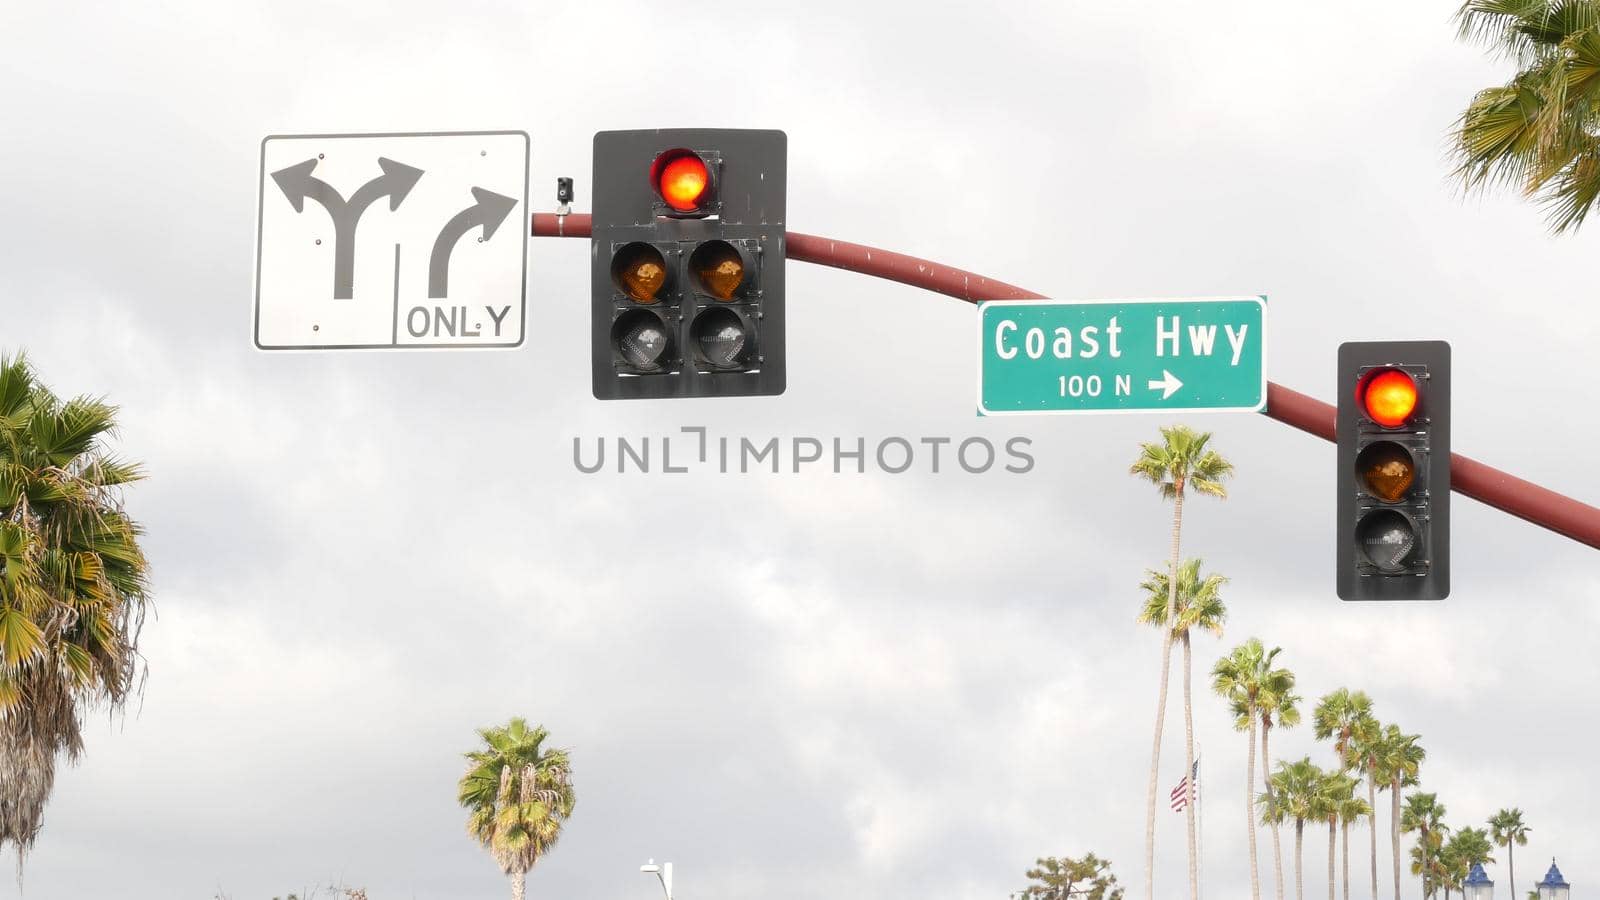 Pacific Coast Highway, historic route 101 road sign, tourist destination in California USA. Lettering on intersection signpost. Symbol of summertime travel along the ocean. All-American scenic hwy by DogoraSun